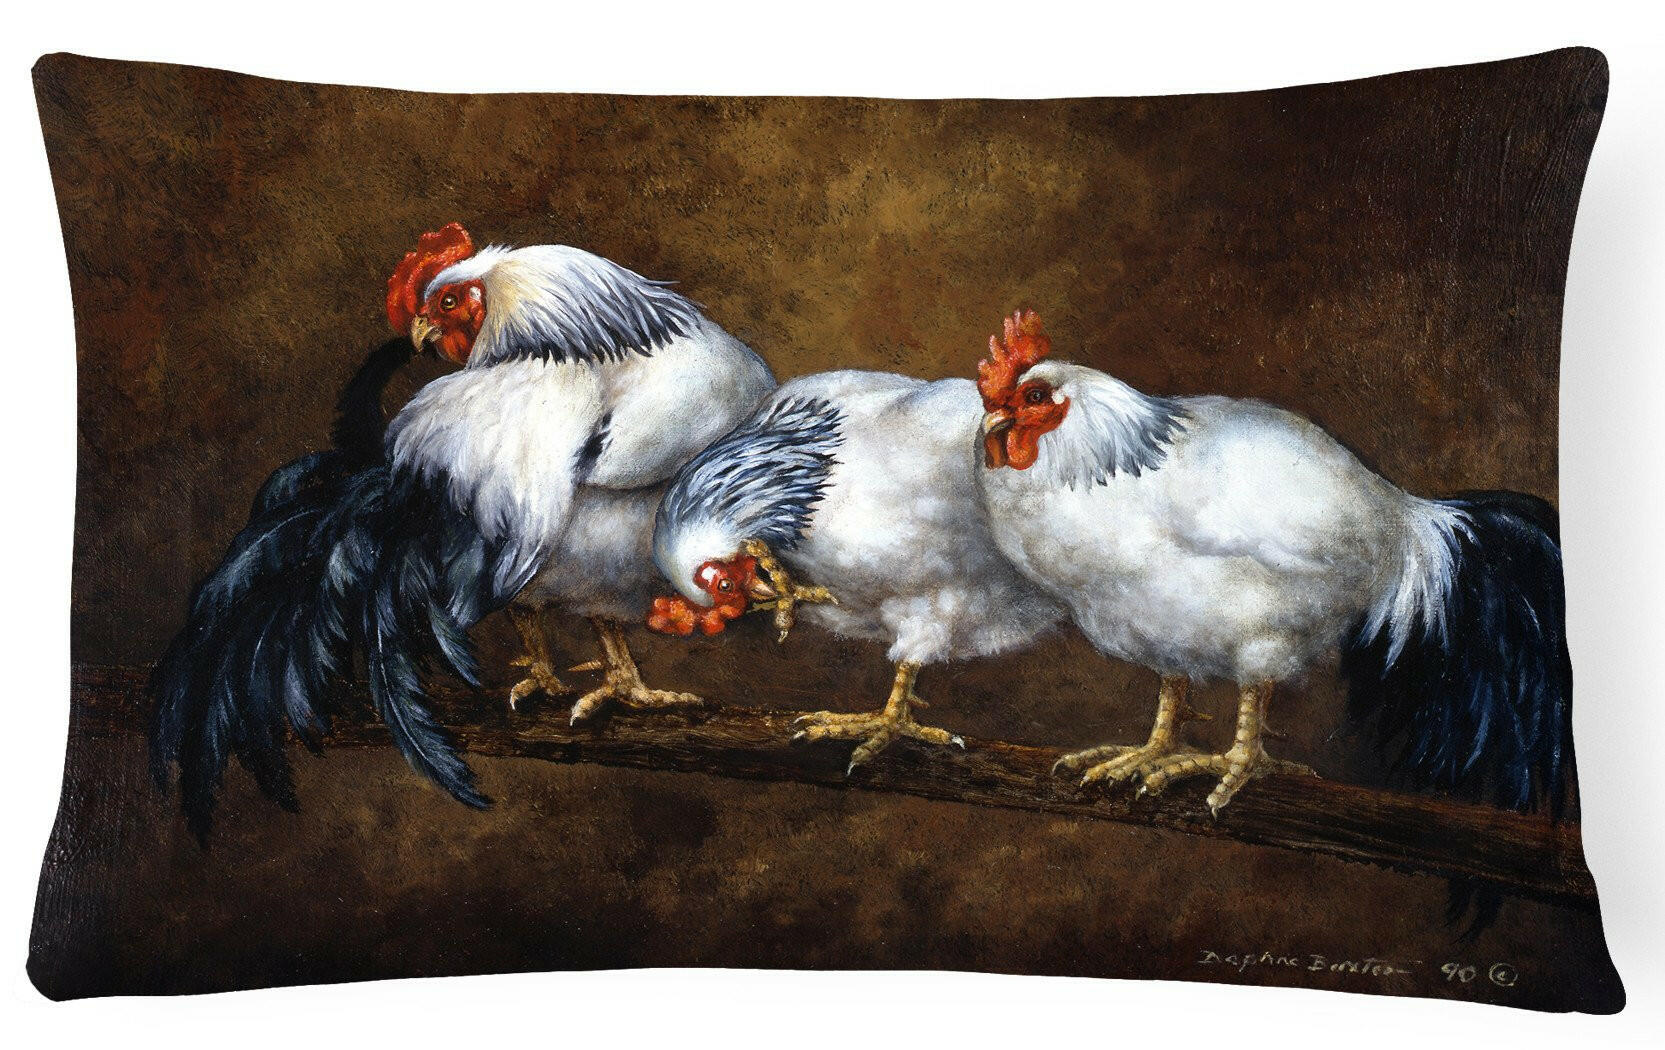 Roosting Rooster and Chickens Fabric Decorative Pillow BDBA0081PW1216 by Caroline's Treasures